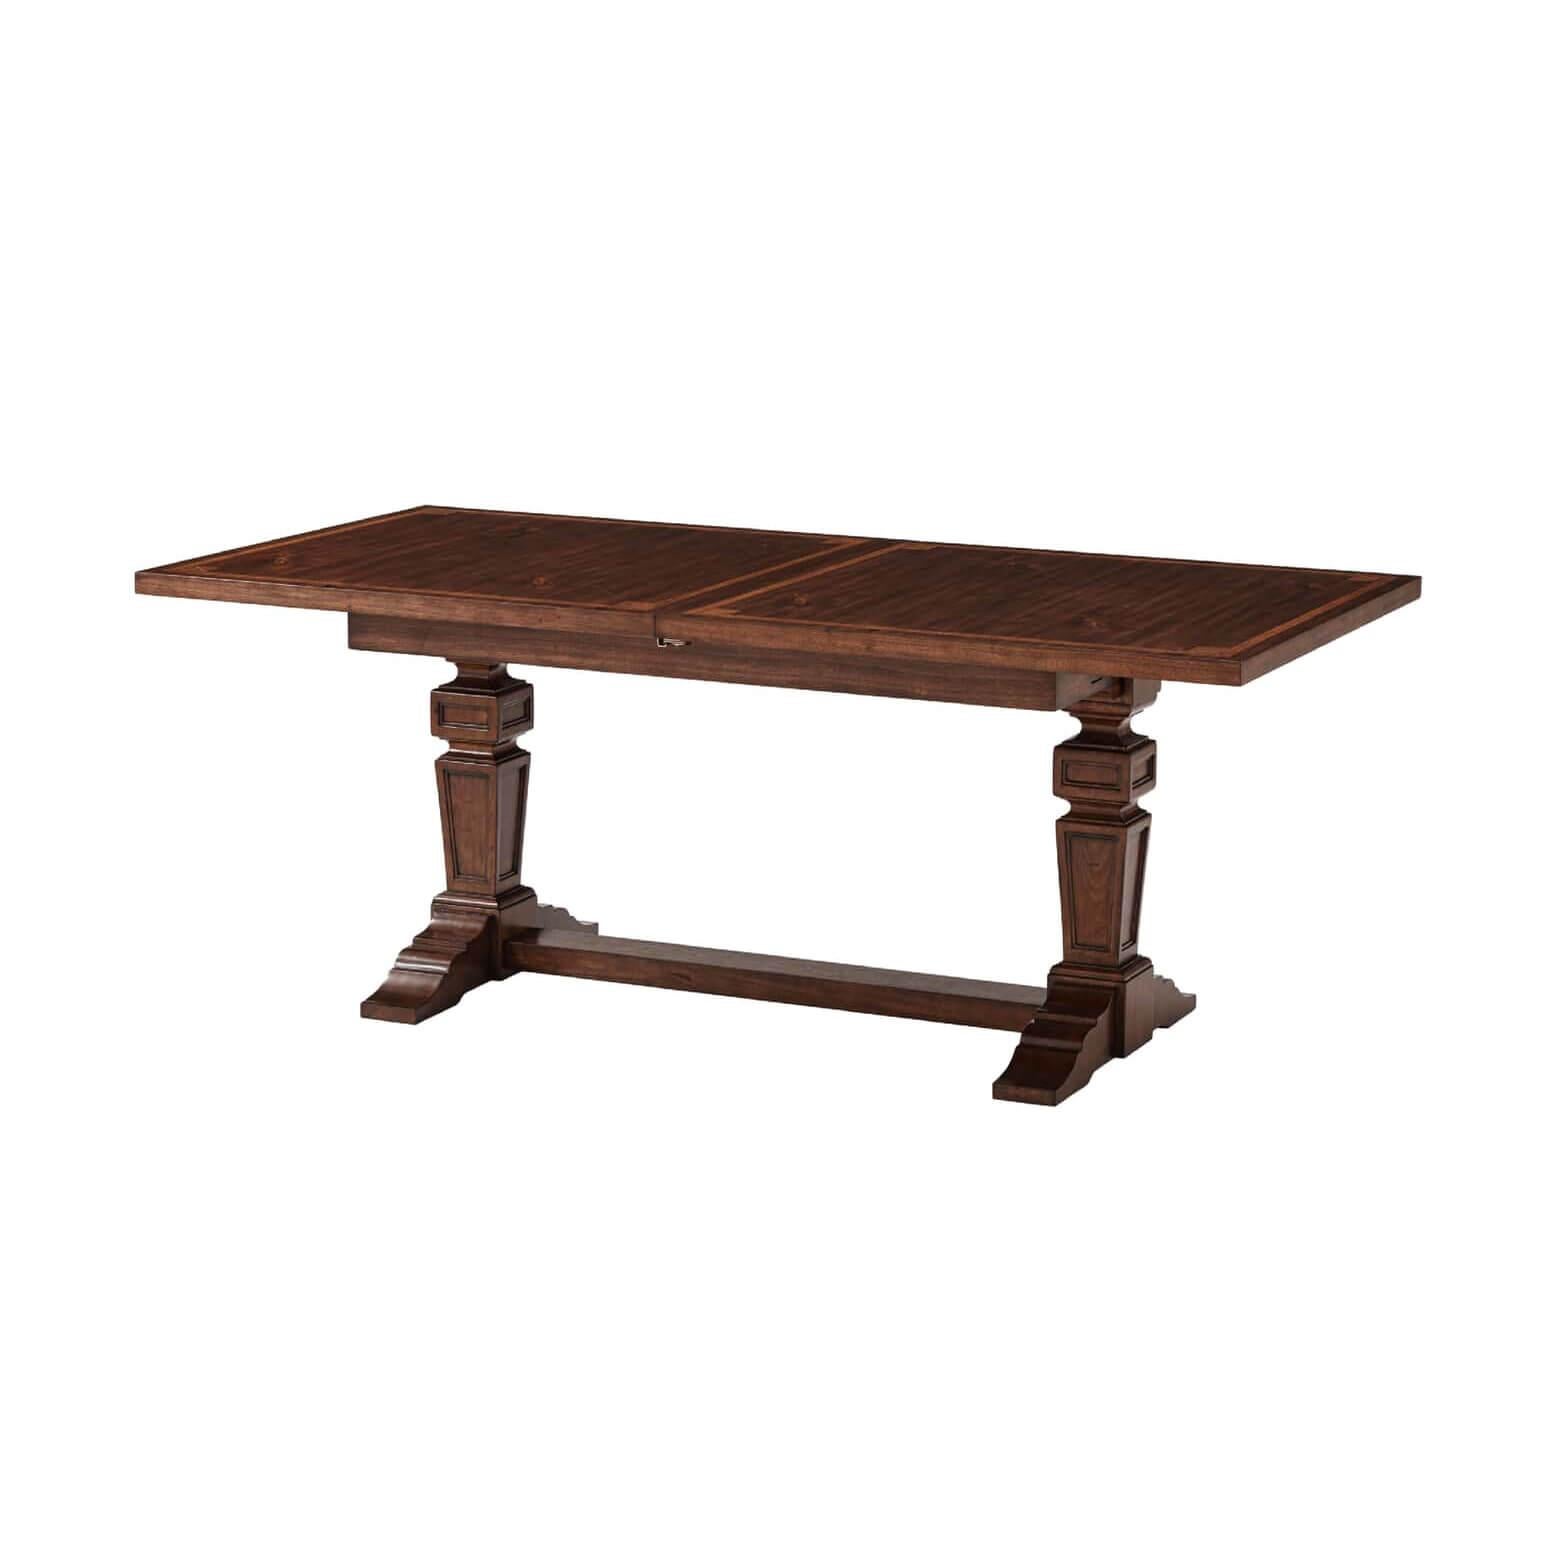 Provincial walnut veneered crossbanded neoclassic extending dining table on carved square tapered trestle ends joined by a stretcher.

Dimensions: 120